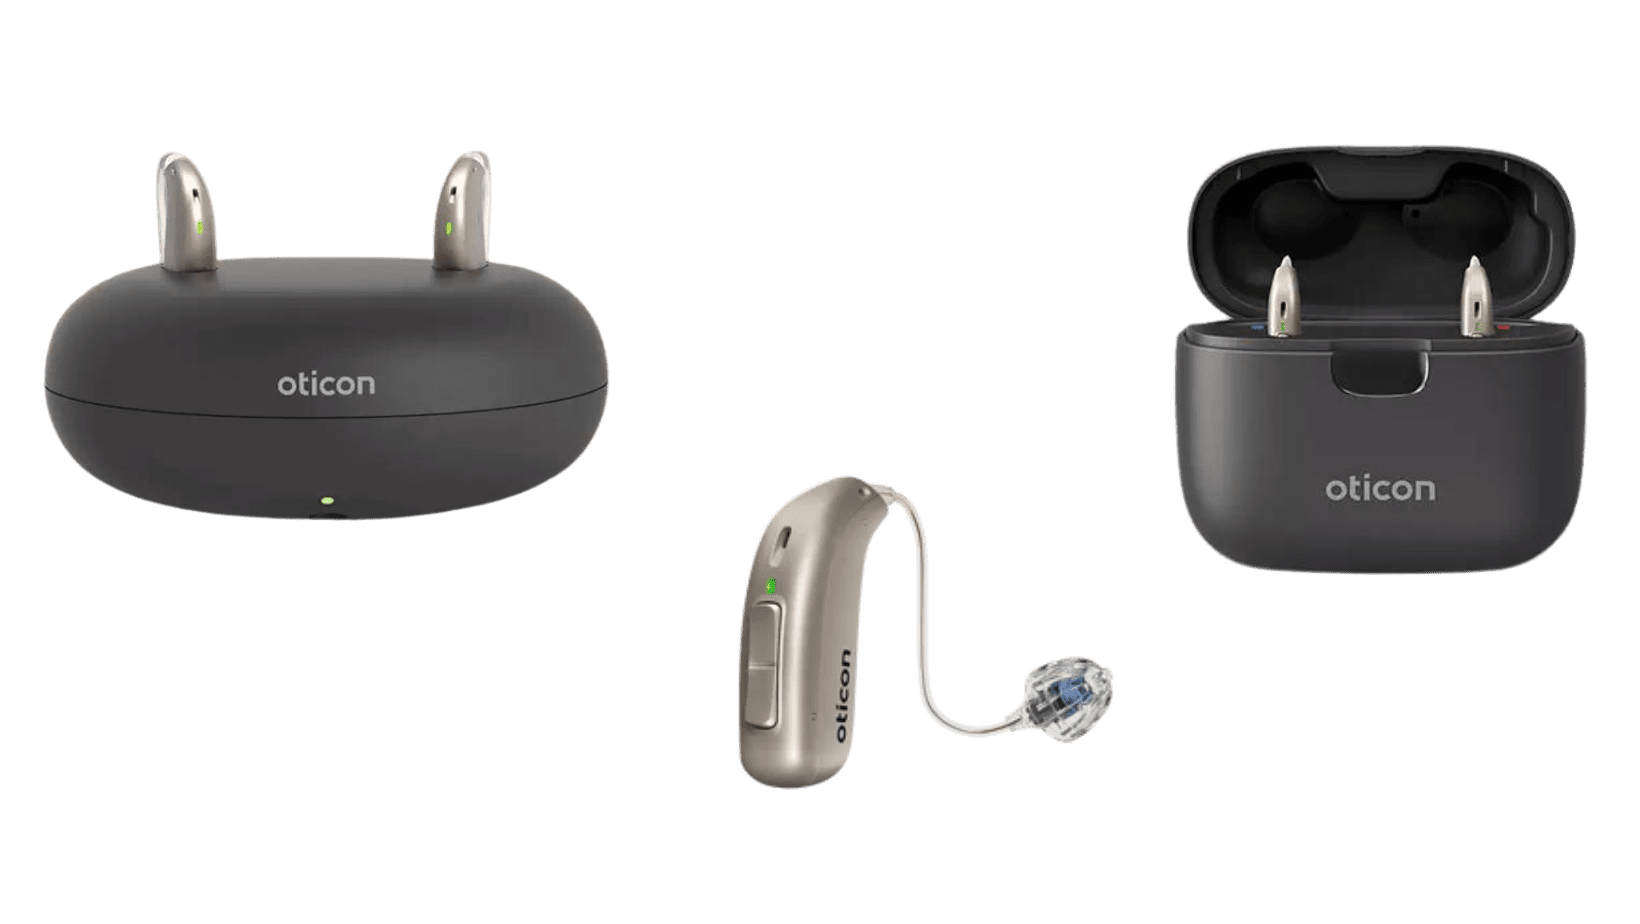 Picture of Oticon Real MiniRITE R hearing aids and chargers